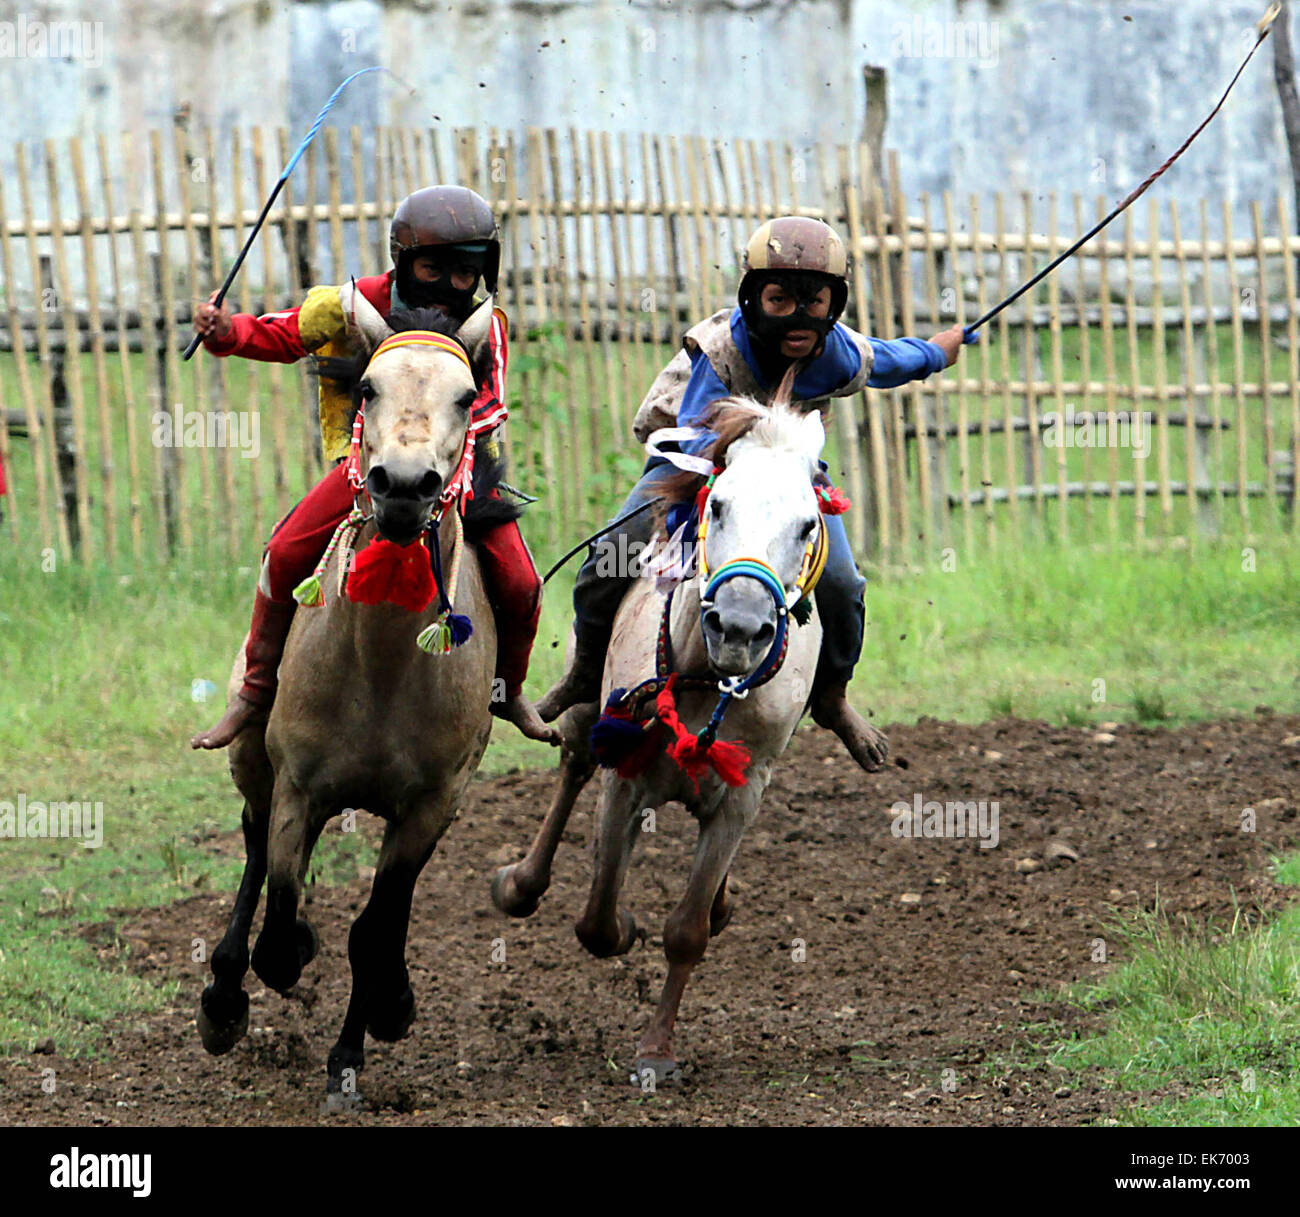 West Nusa Tenggara, Indonesia. 7th Apr, 2015. Children take part in a horse race at Mount Tambora Festival in Dompu, West Nusa Tenggara, Indonesia, April 7, 2015. Children horse race is a part of the Mount Tambora Festival marking the 200th year of its eruption, which is held from April 5 to April 11. The 1815 explosion of Mount Tambora buried the inhabitants of Sumbawa Island under searing ash, gas and rock, killing an estimated 88,000 people. Credit:  Dwi Aqilasya/Xinhua/Alamy Live News Stock Photo